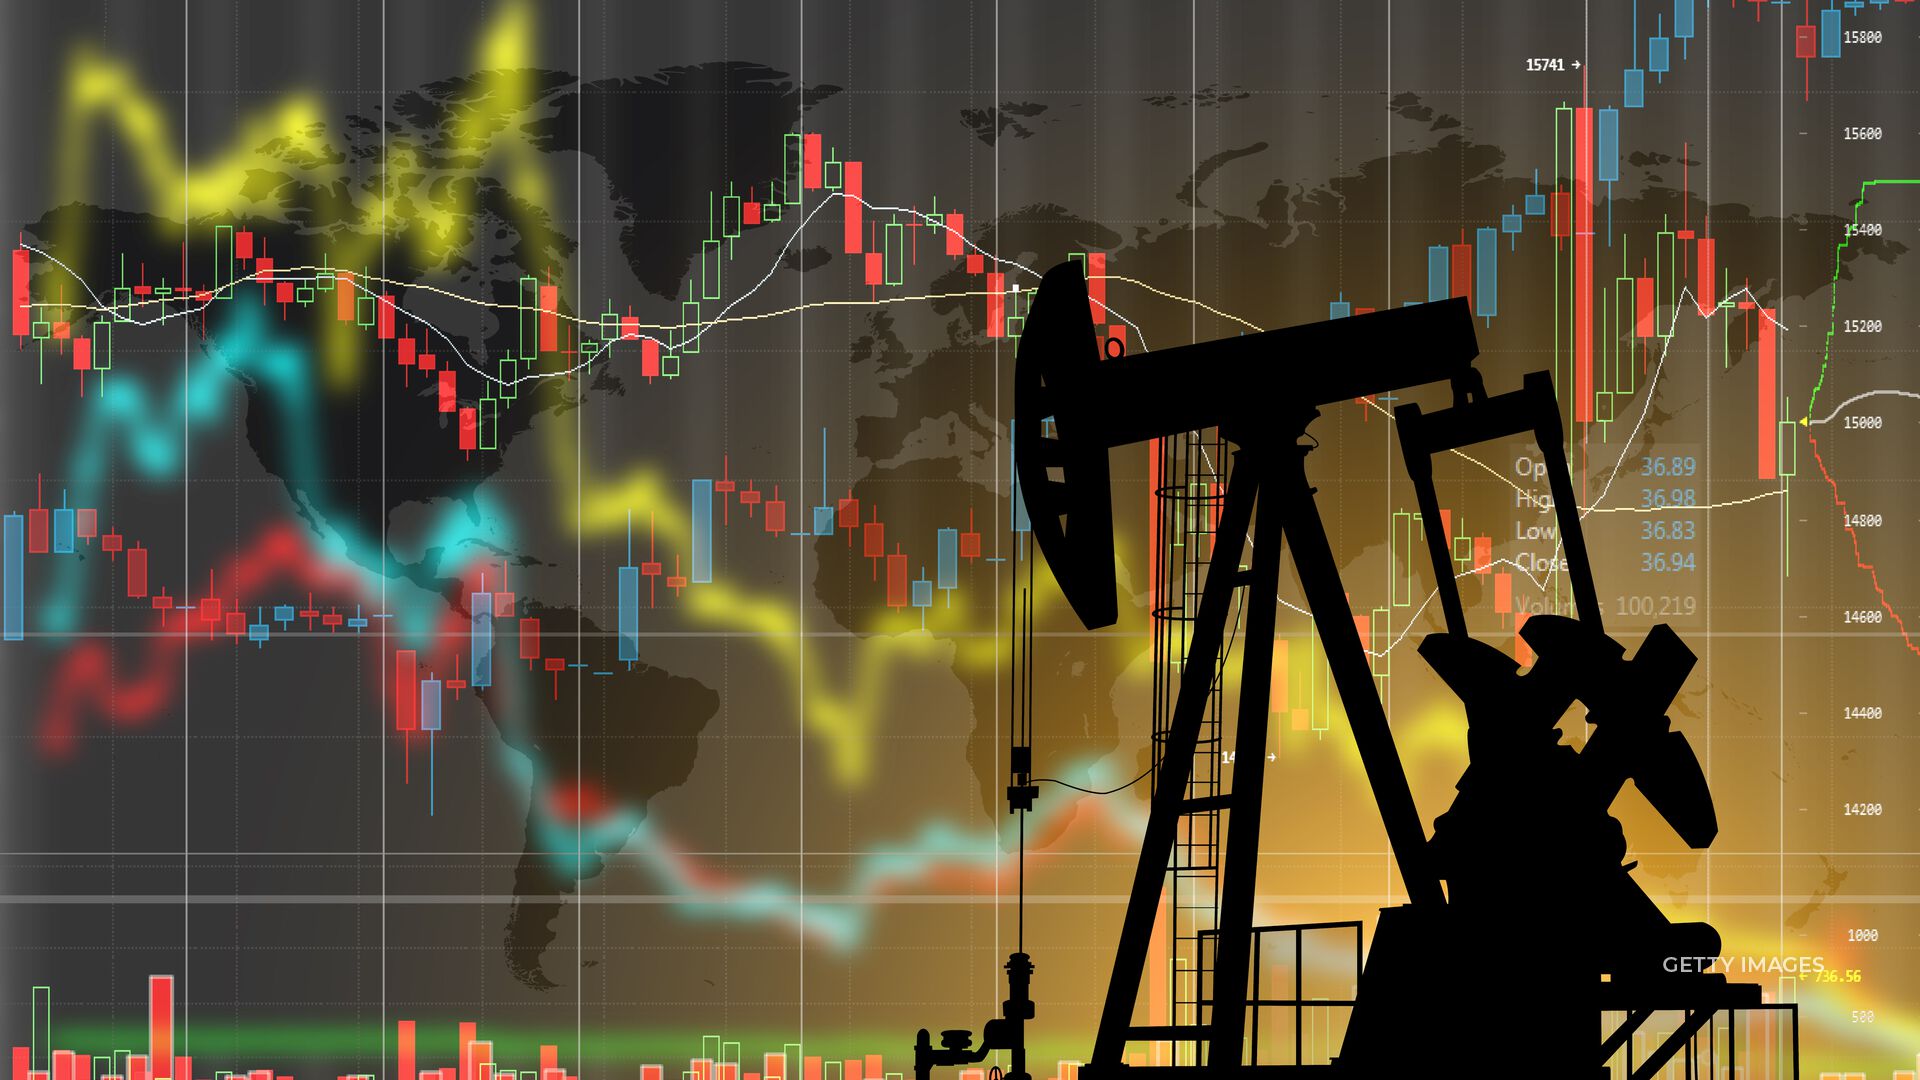 Oil prices are rising amid tensions between Ukraine and Russia.